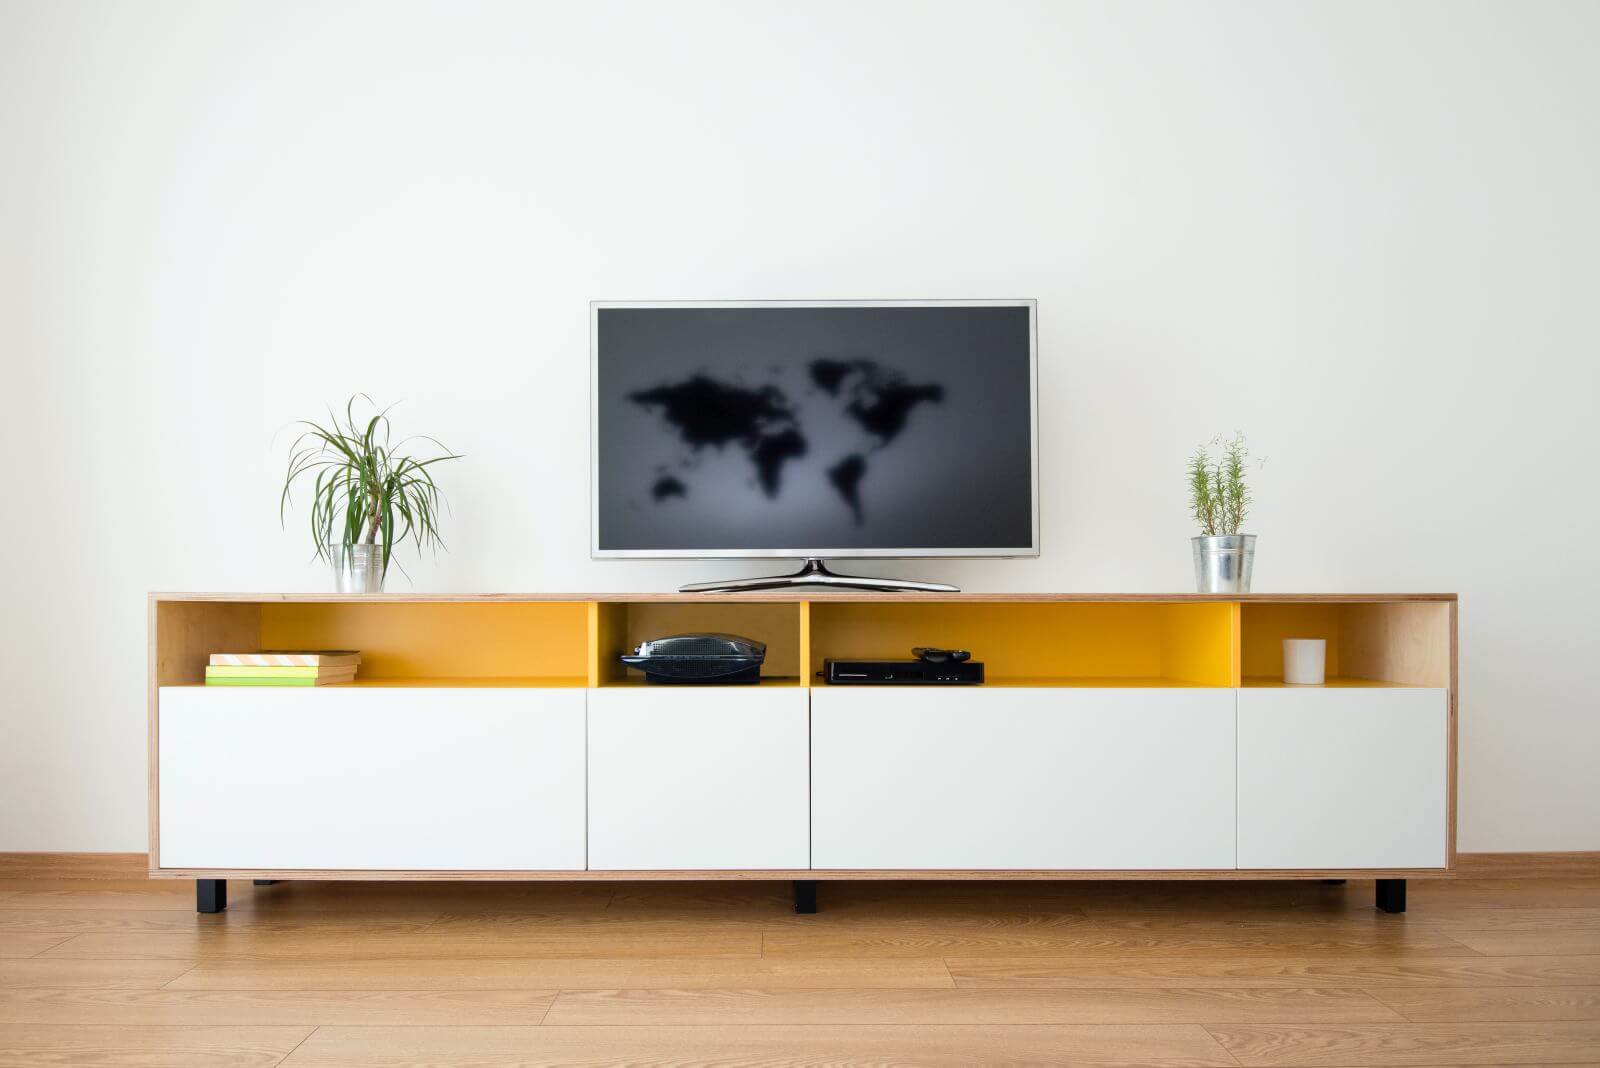 detail of modern living-room - wall with TV